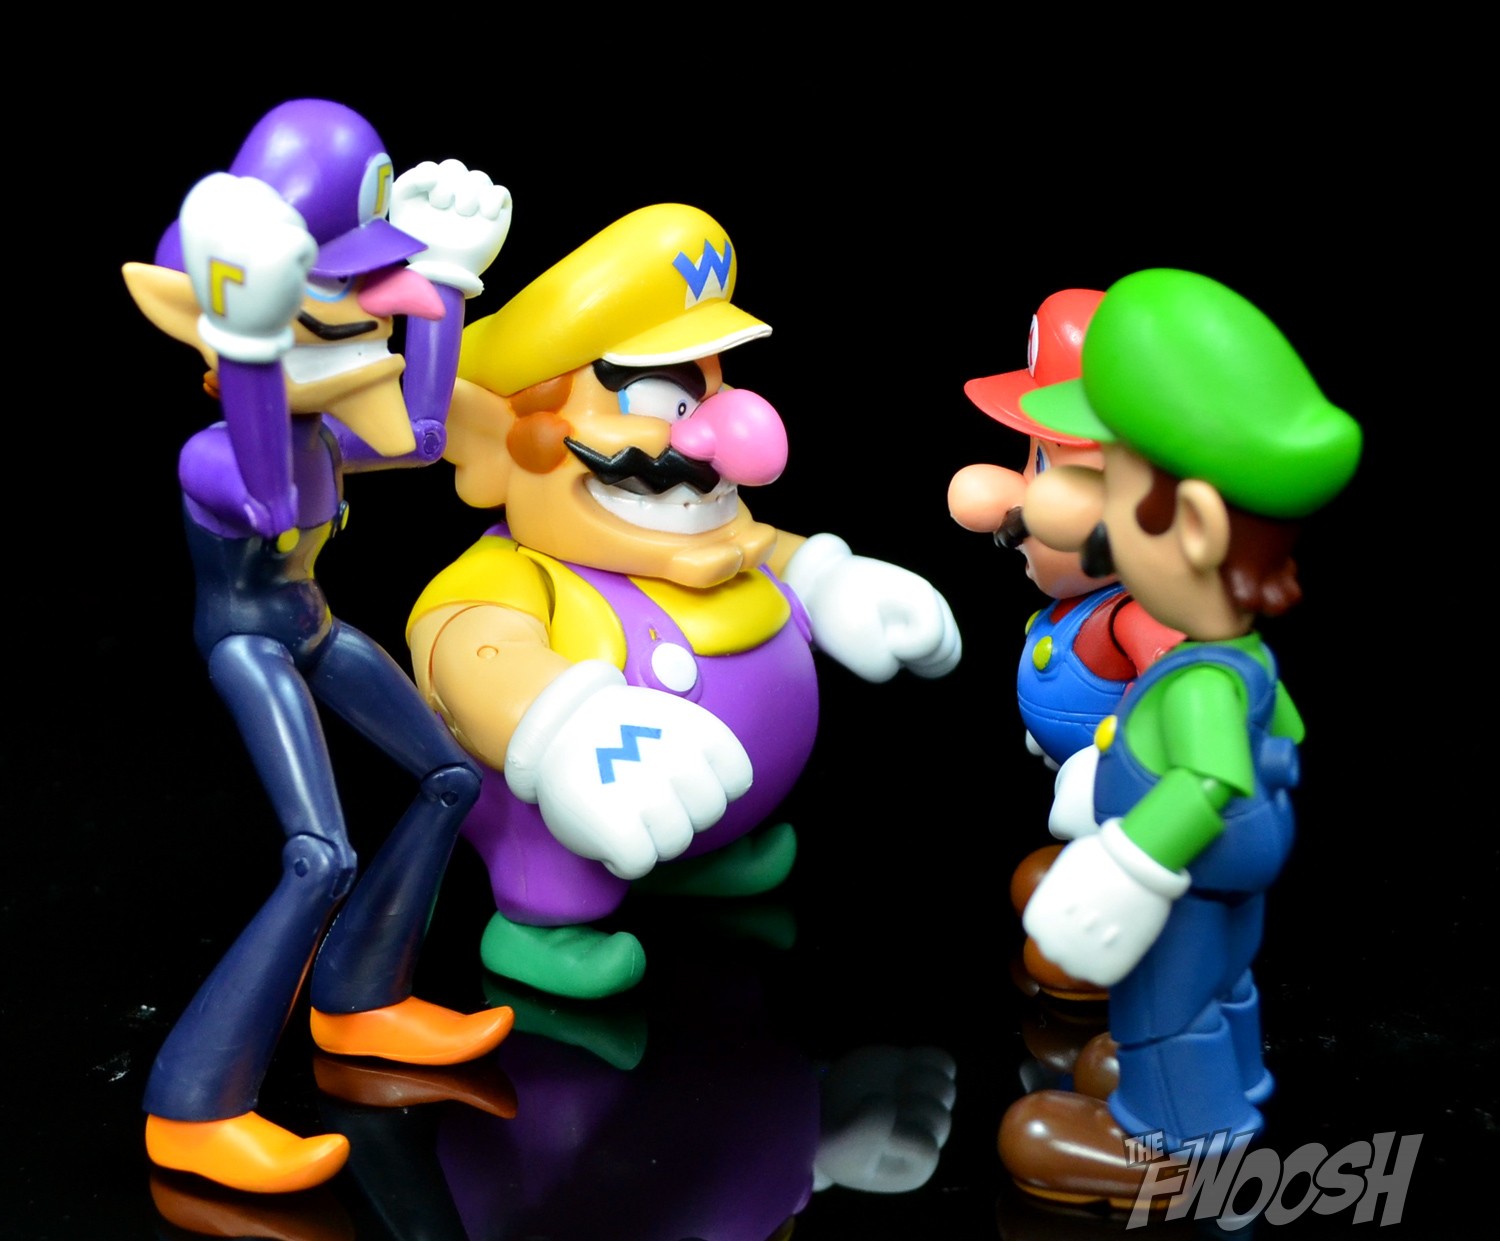 Overall, I am big fan of Waluigi, and I am glad to have him in my collectio...